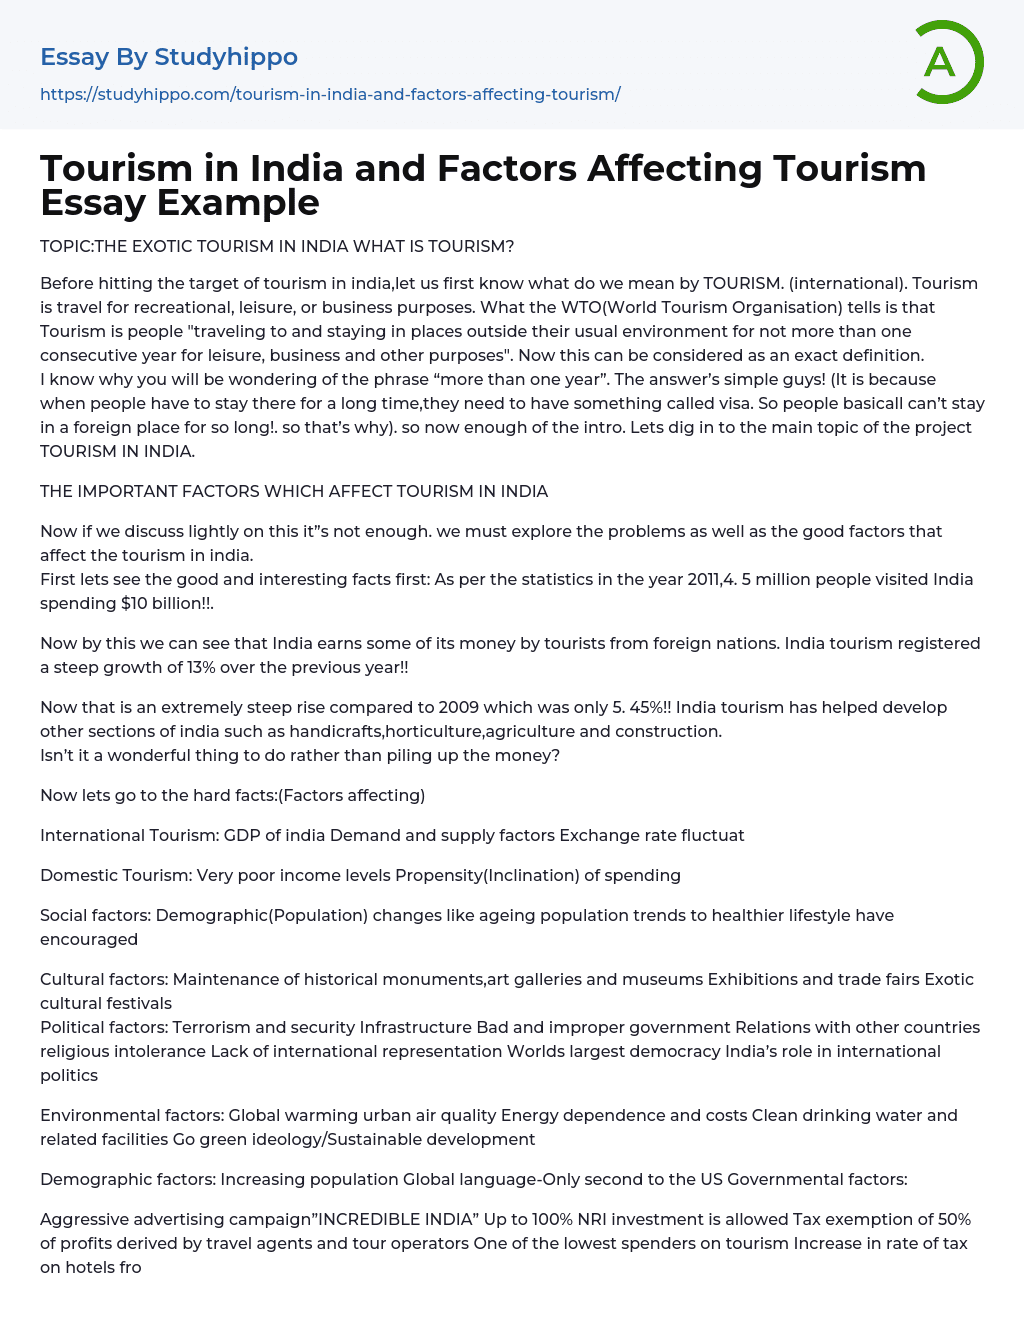 Tourism in India and Factors Affecting Tourism Essay Example